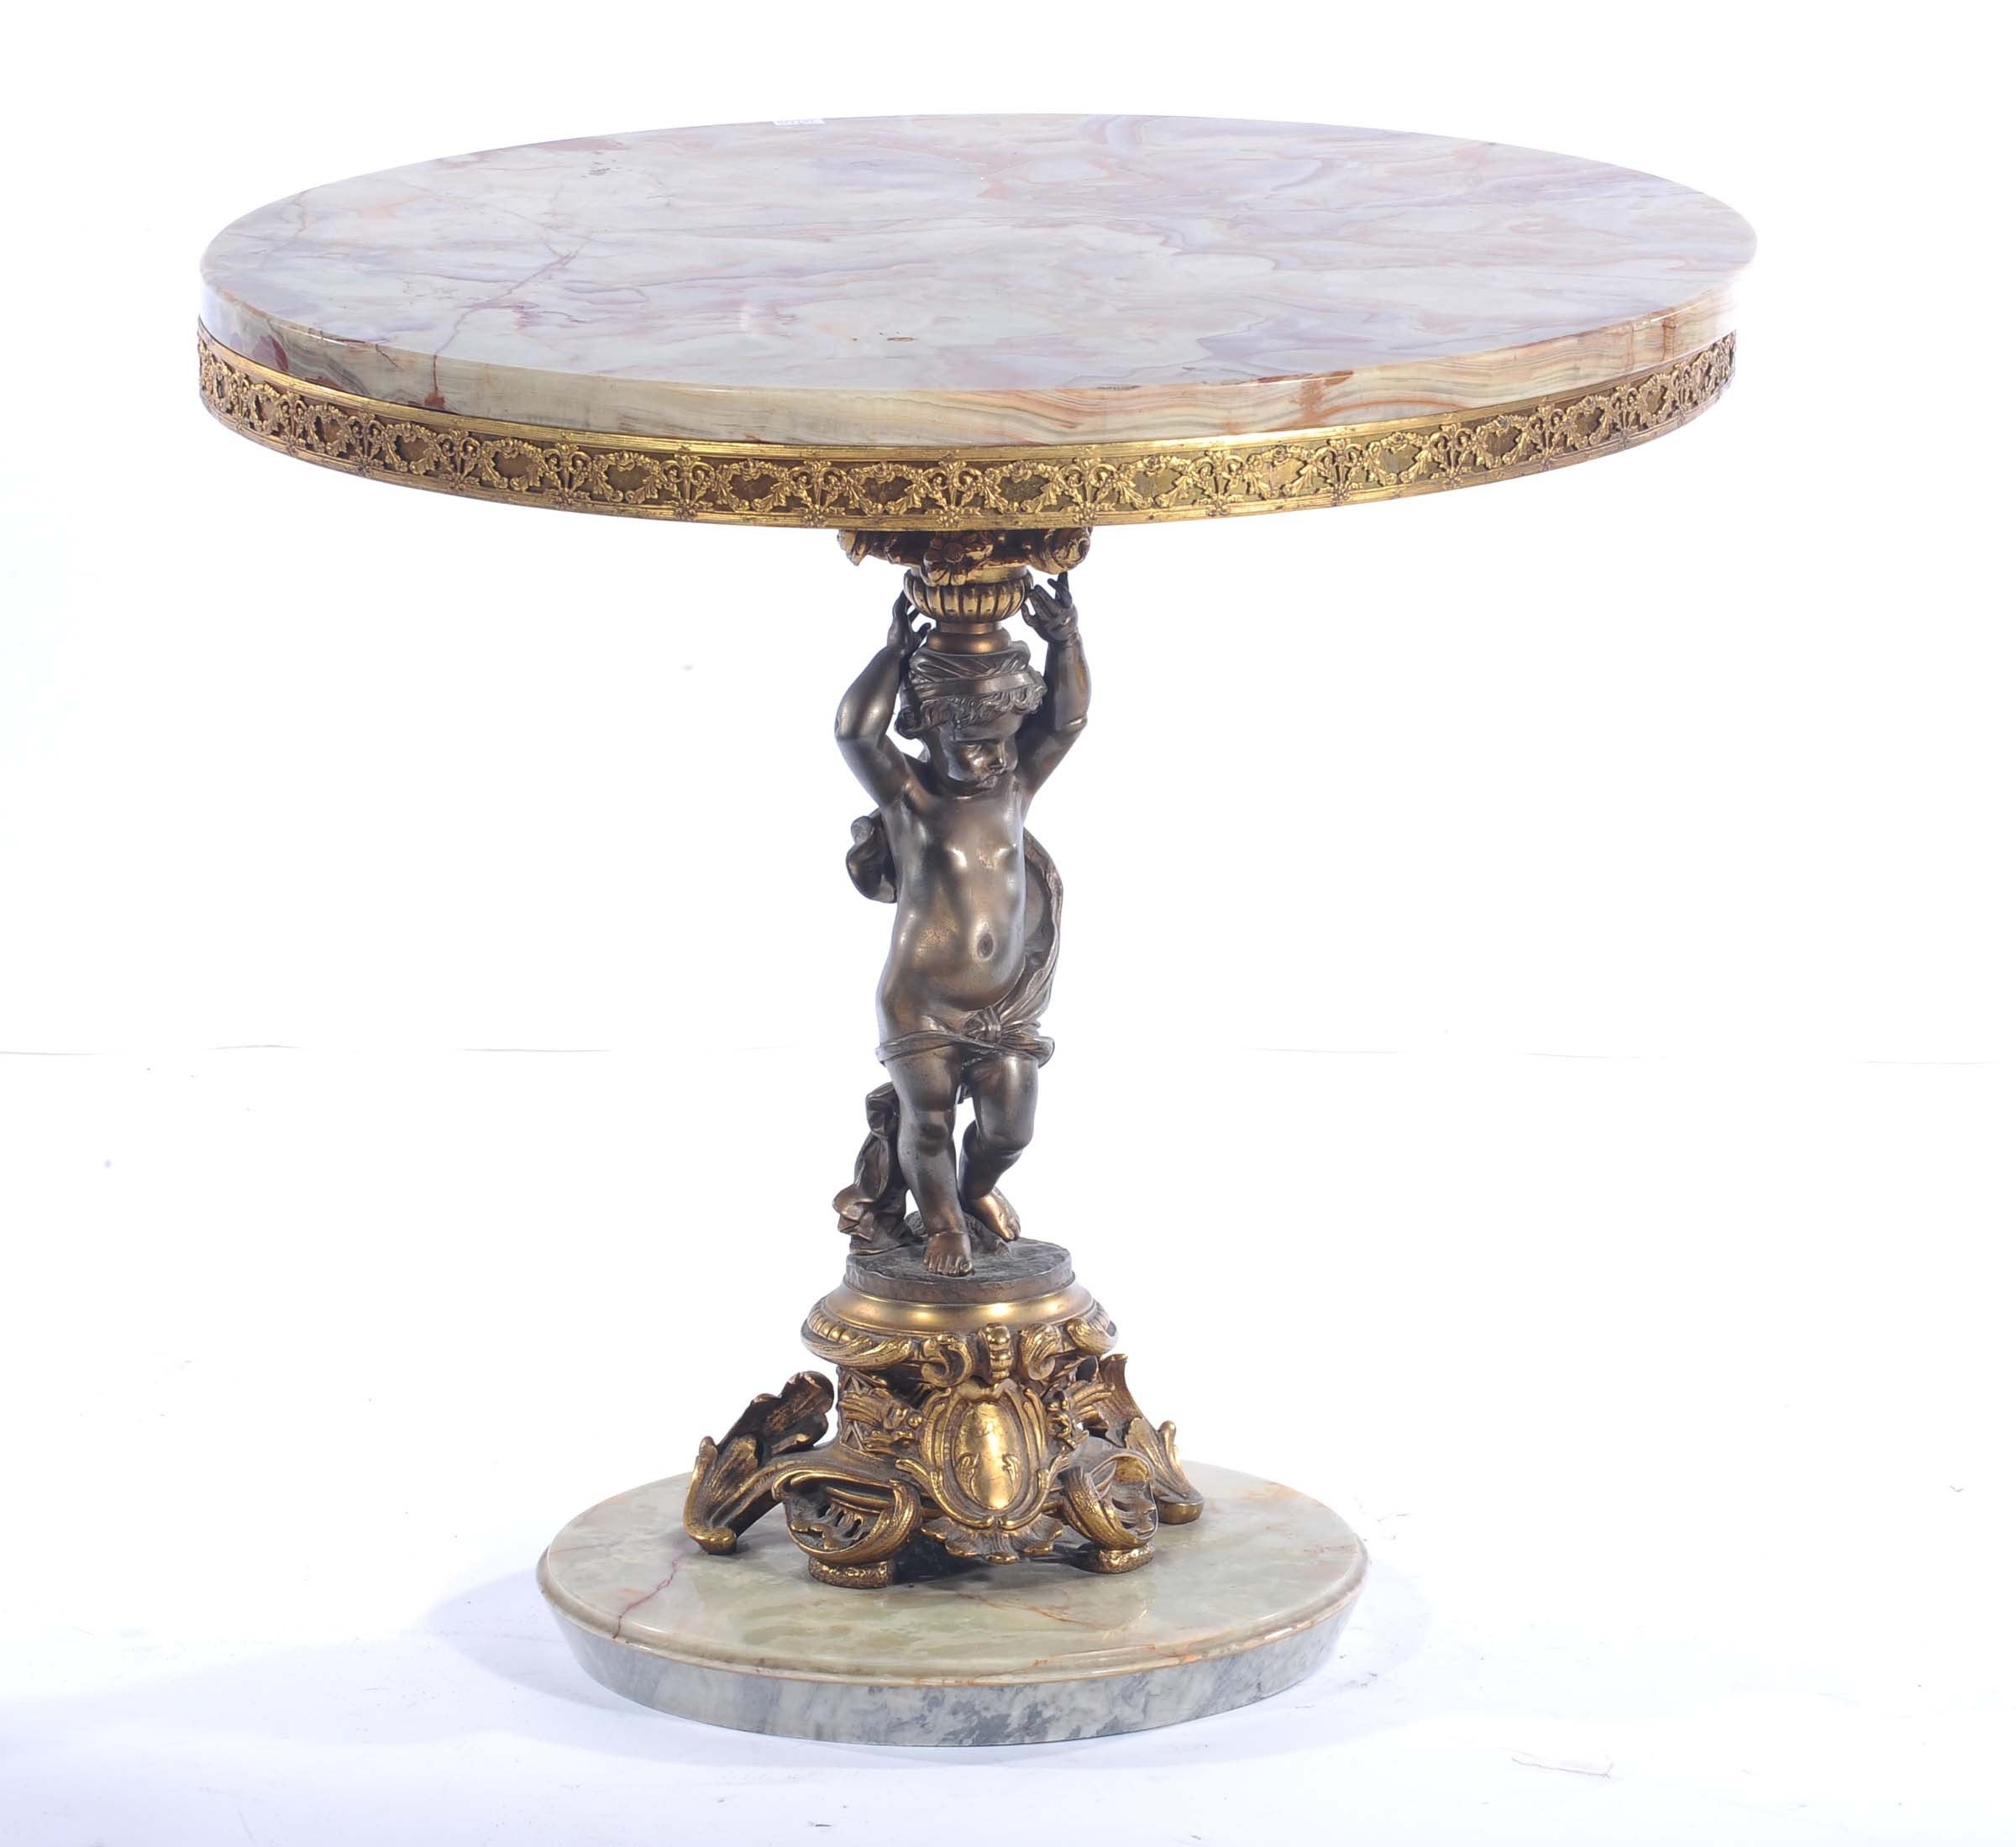 Italian onyx and bronze side table with putti